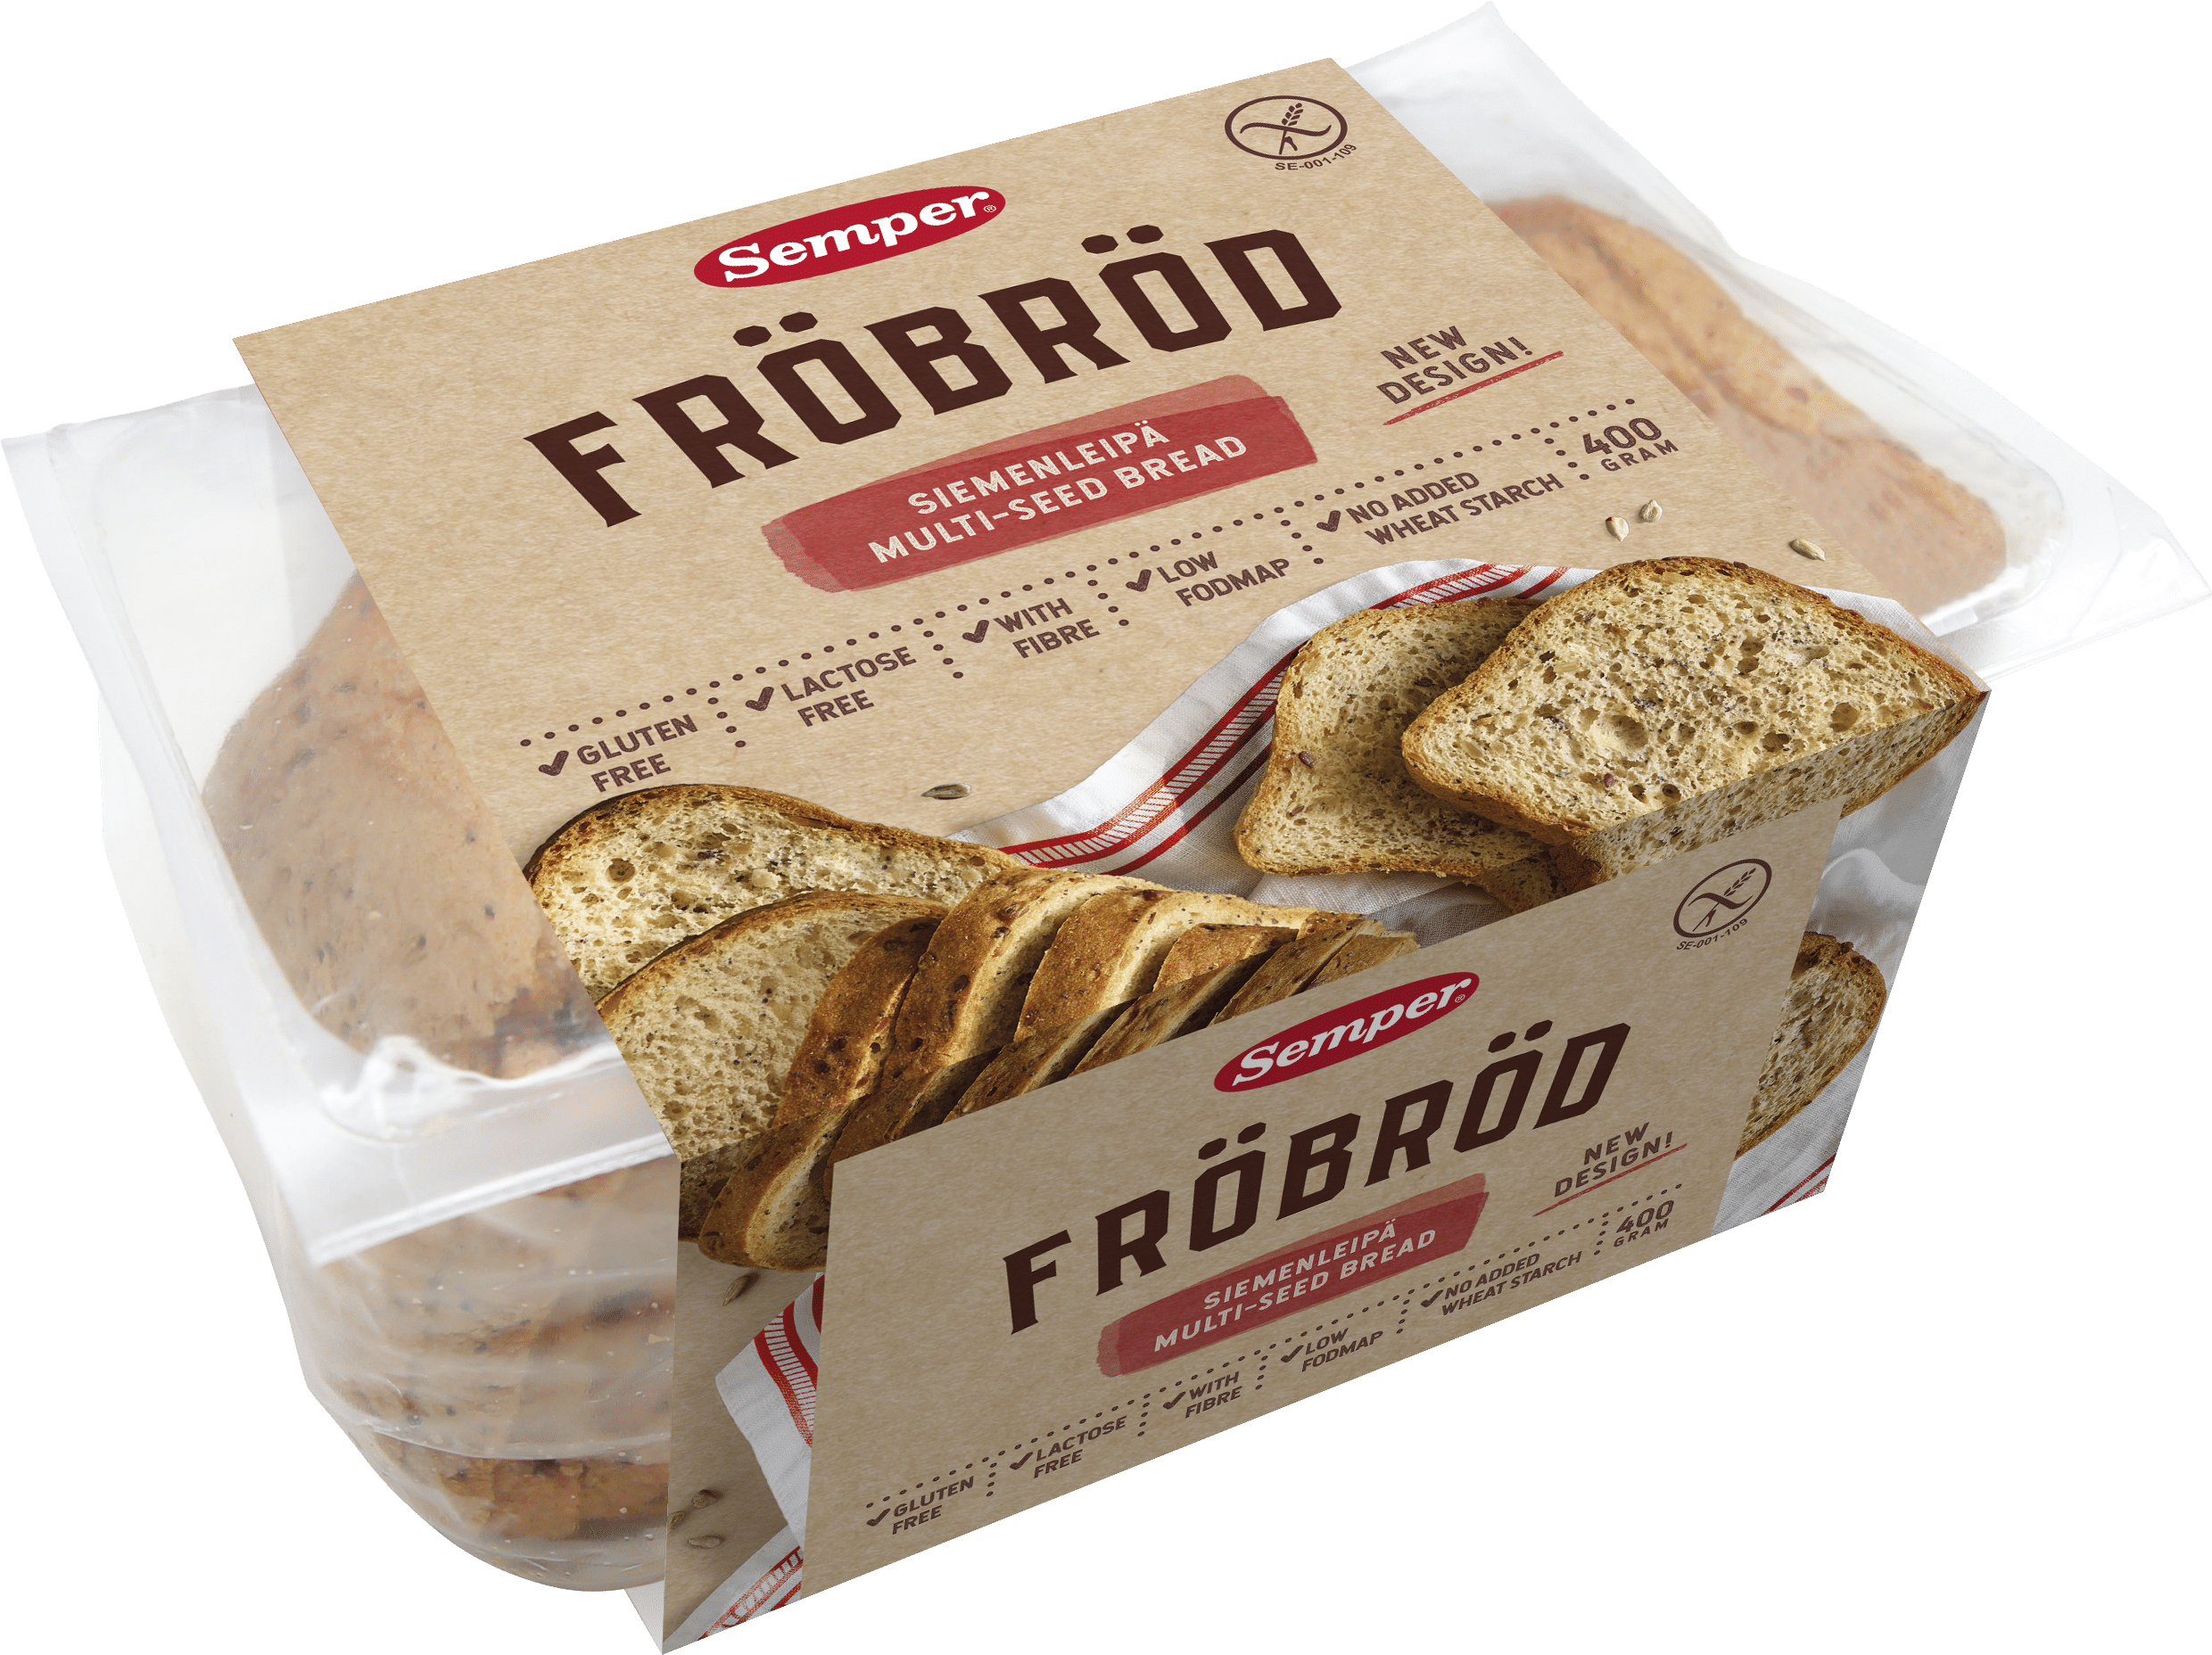 Finding FODMAP Friendly Semper – Introducing 46 Certified Nordic Products FODMAP Friendly